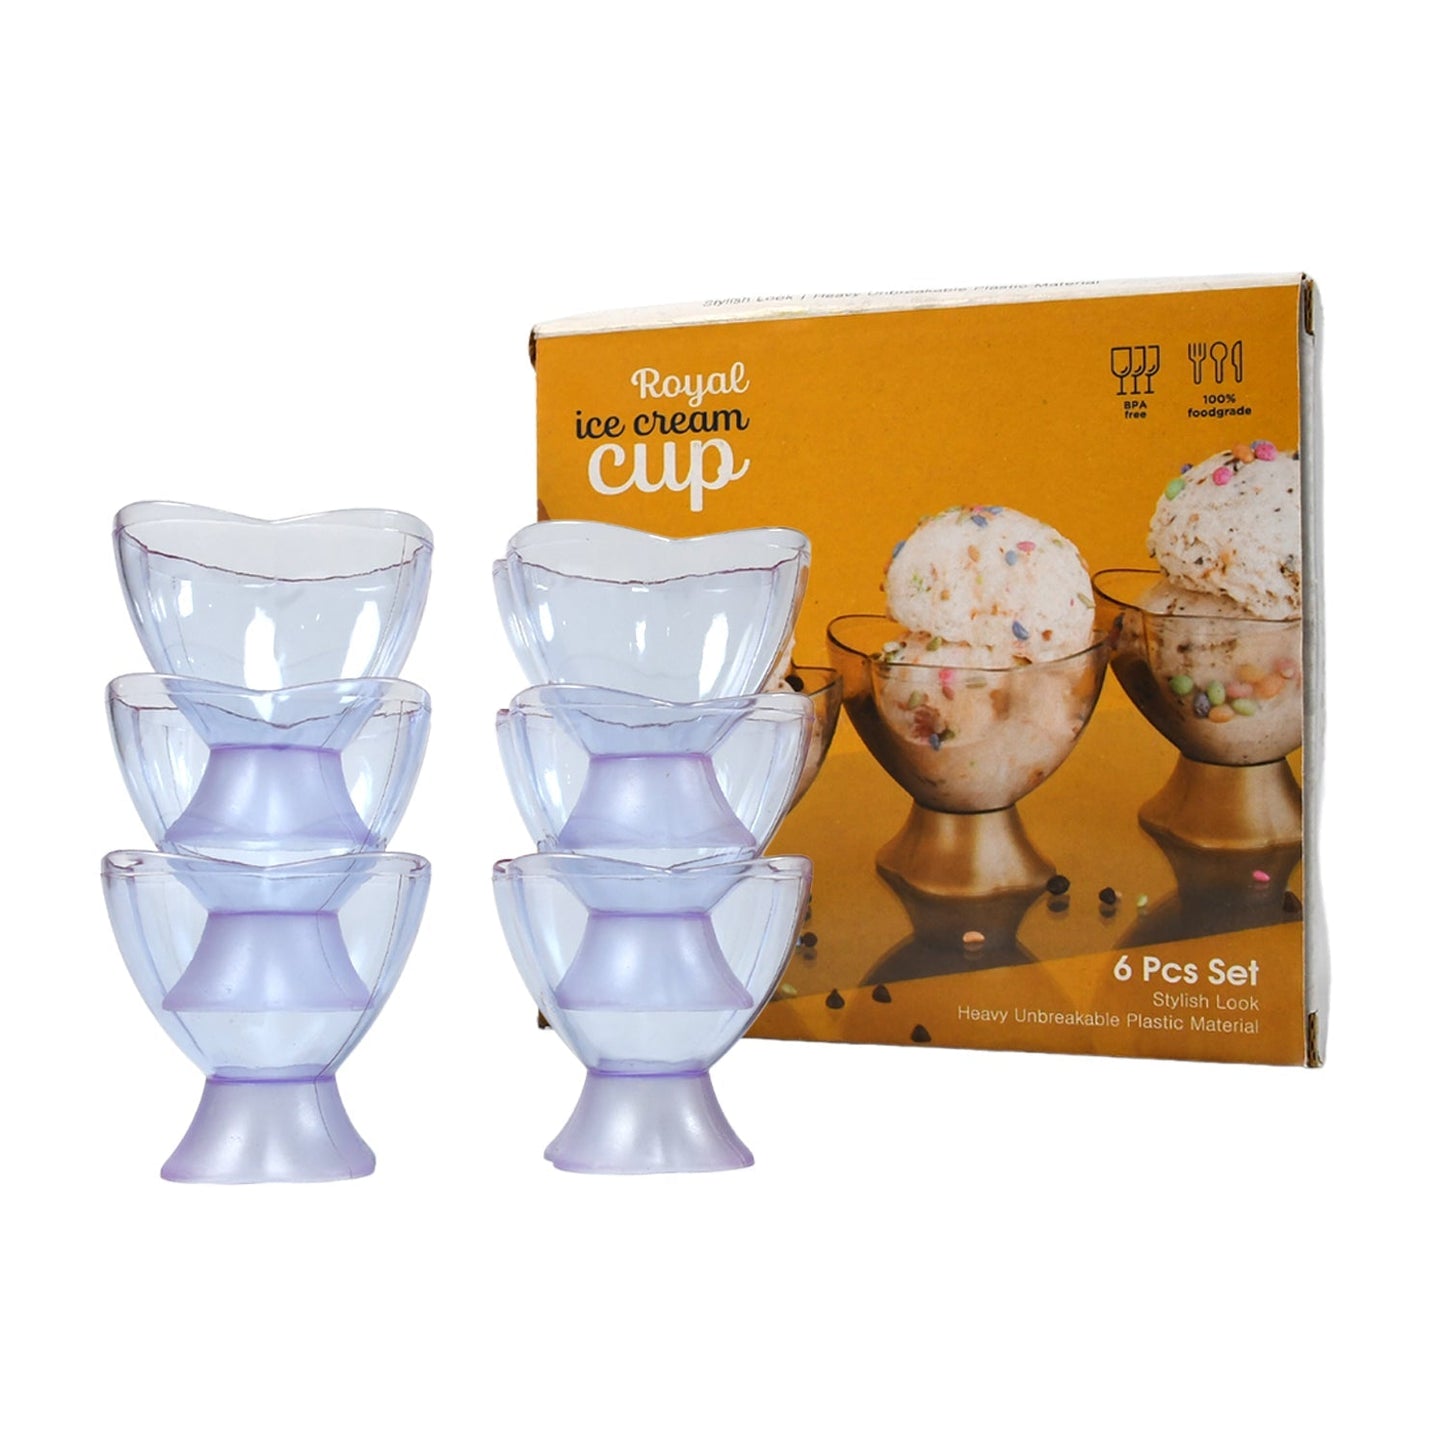 5343 NEW MODERN STYLE DESSERT & ICE CREAM BOWL PLASTIC 6PCS FOR HOME , OFFICE & PARTY USE JK Trends